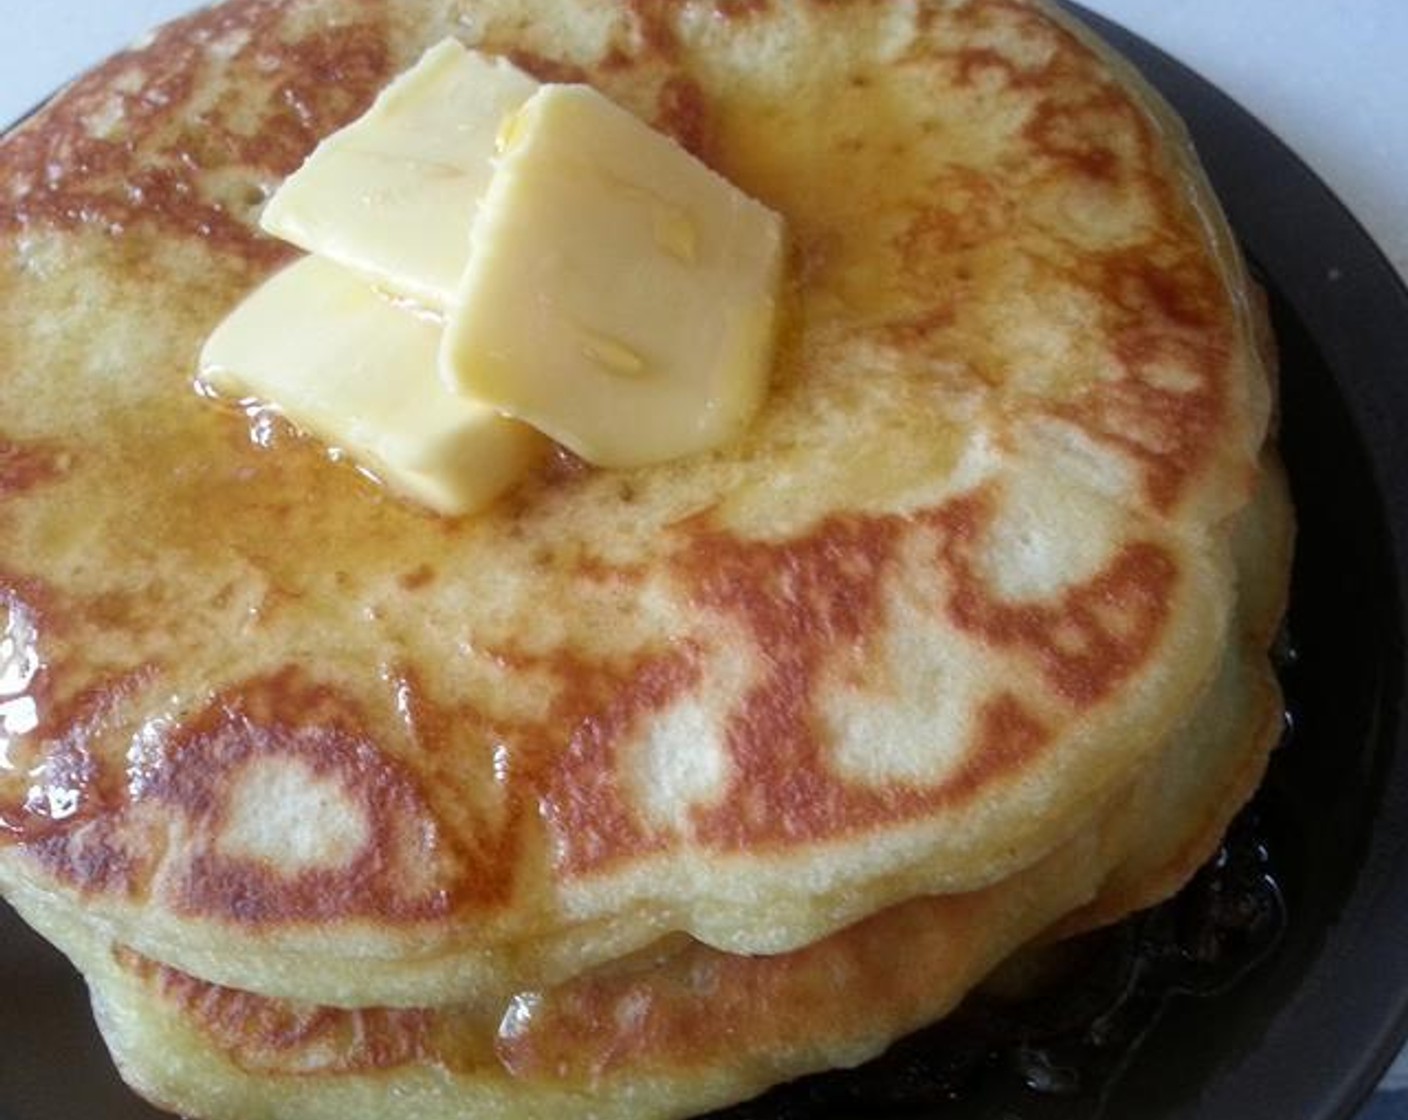 The Fluffiest Pancakes